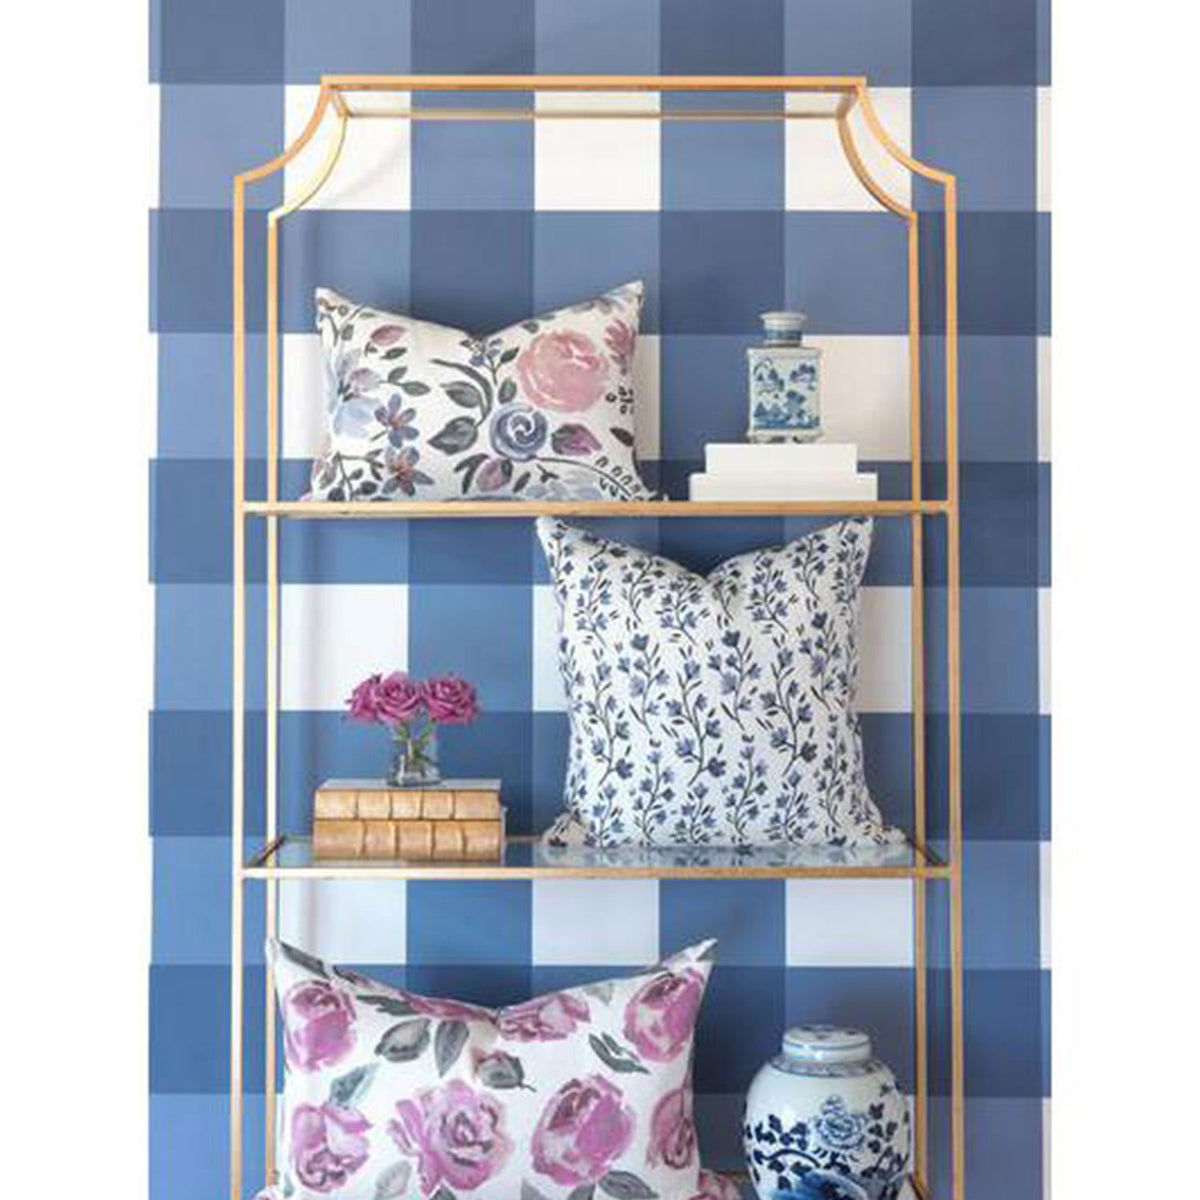 Grande Check Plaid Wallpaper in French Blue